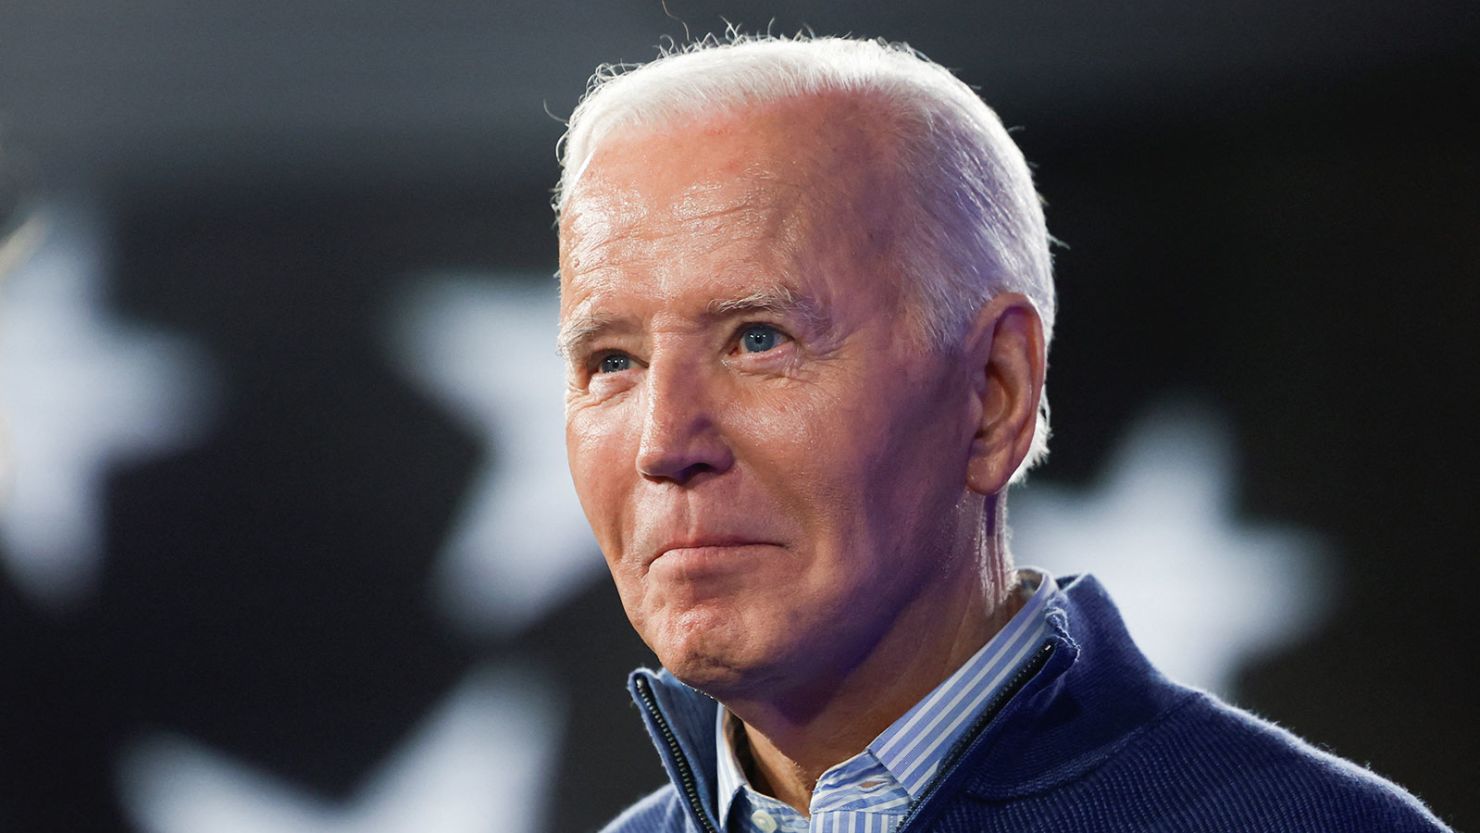 President Joe Biden attends a campaign event at Strath Haven Middle School in Wallingford, Pennsylvania, March 8, 2024.